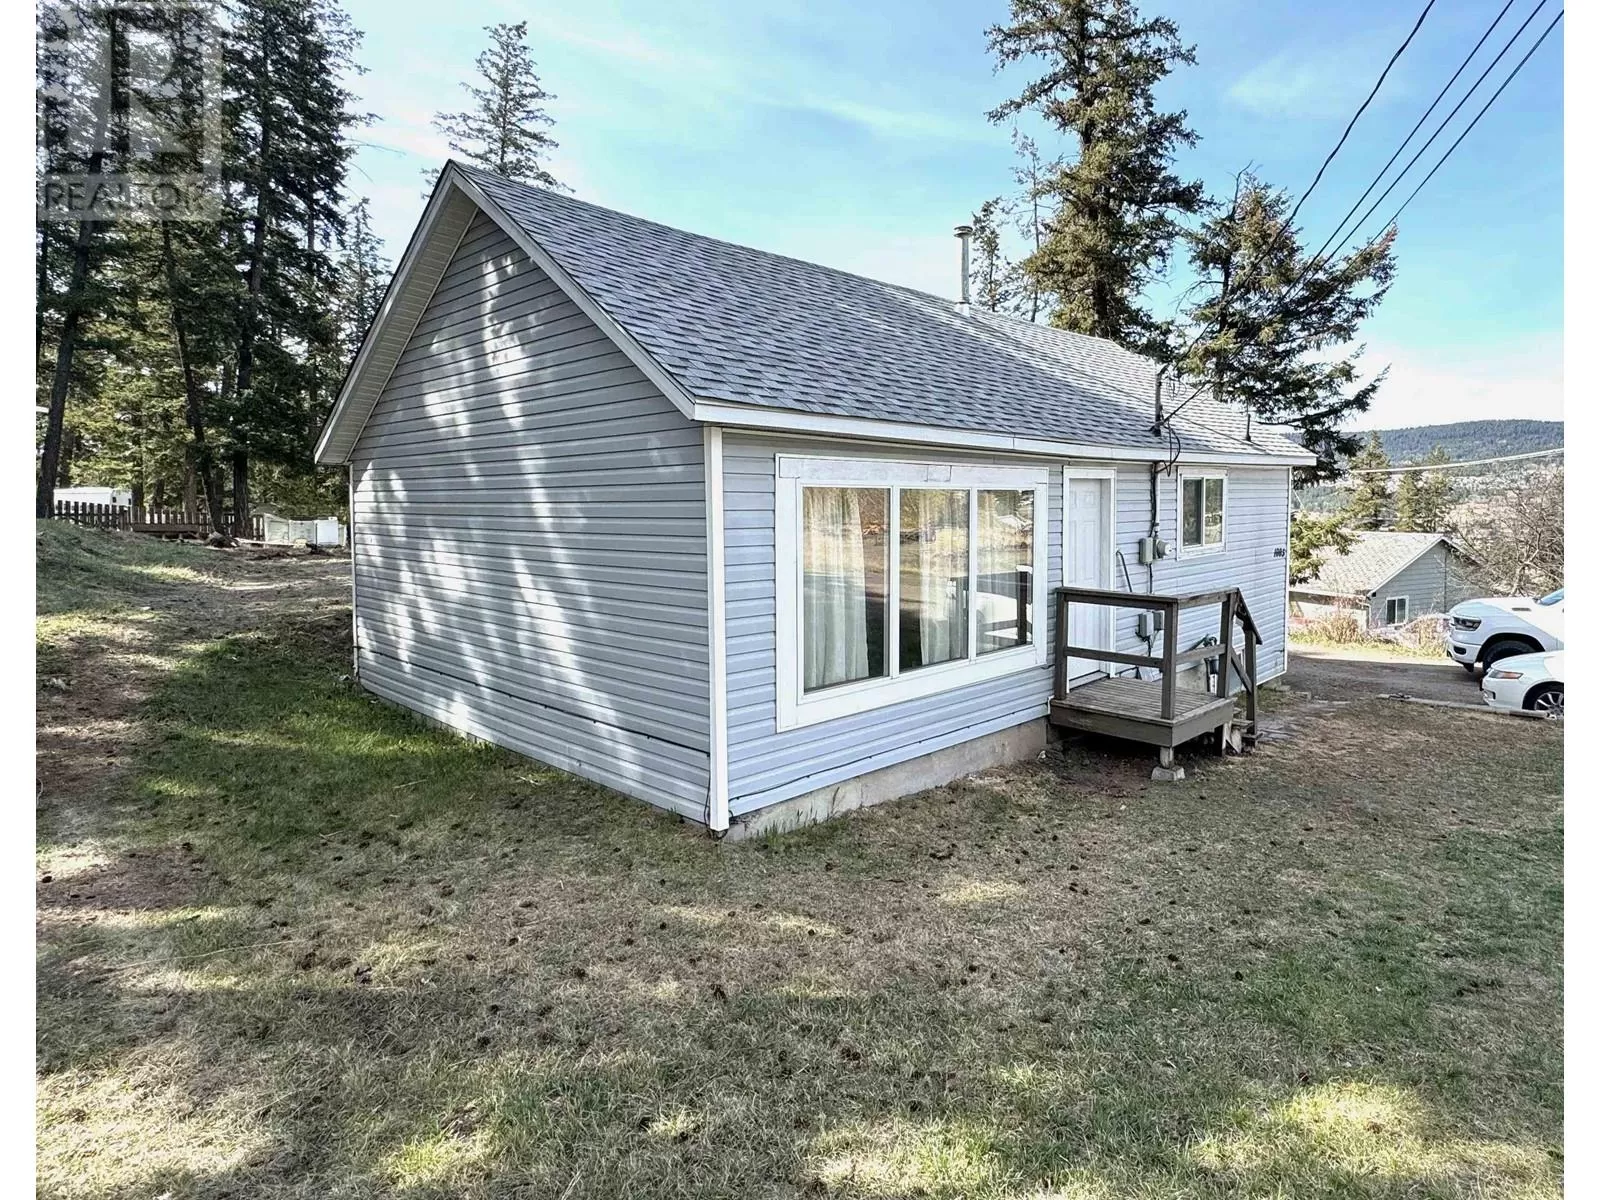 House for rent: 1005 Proctor Street, Williams Lake, British Columbia V2G 2Y6